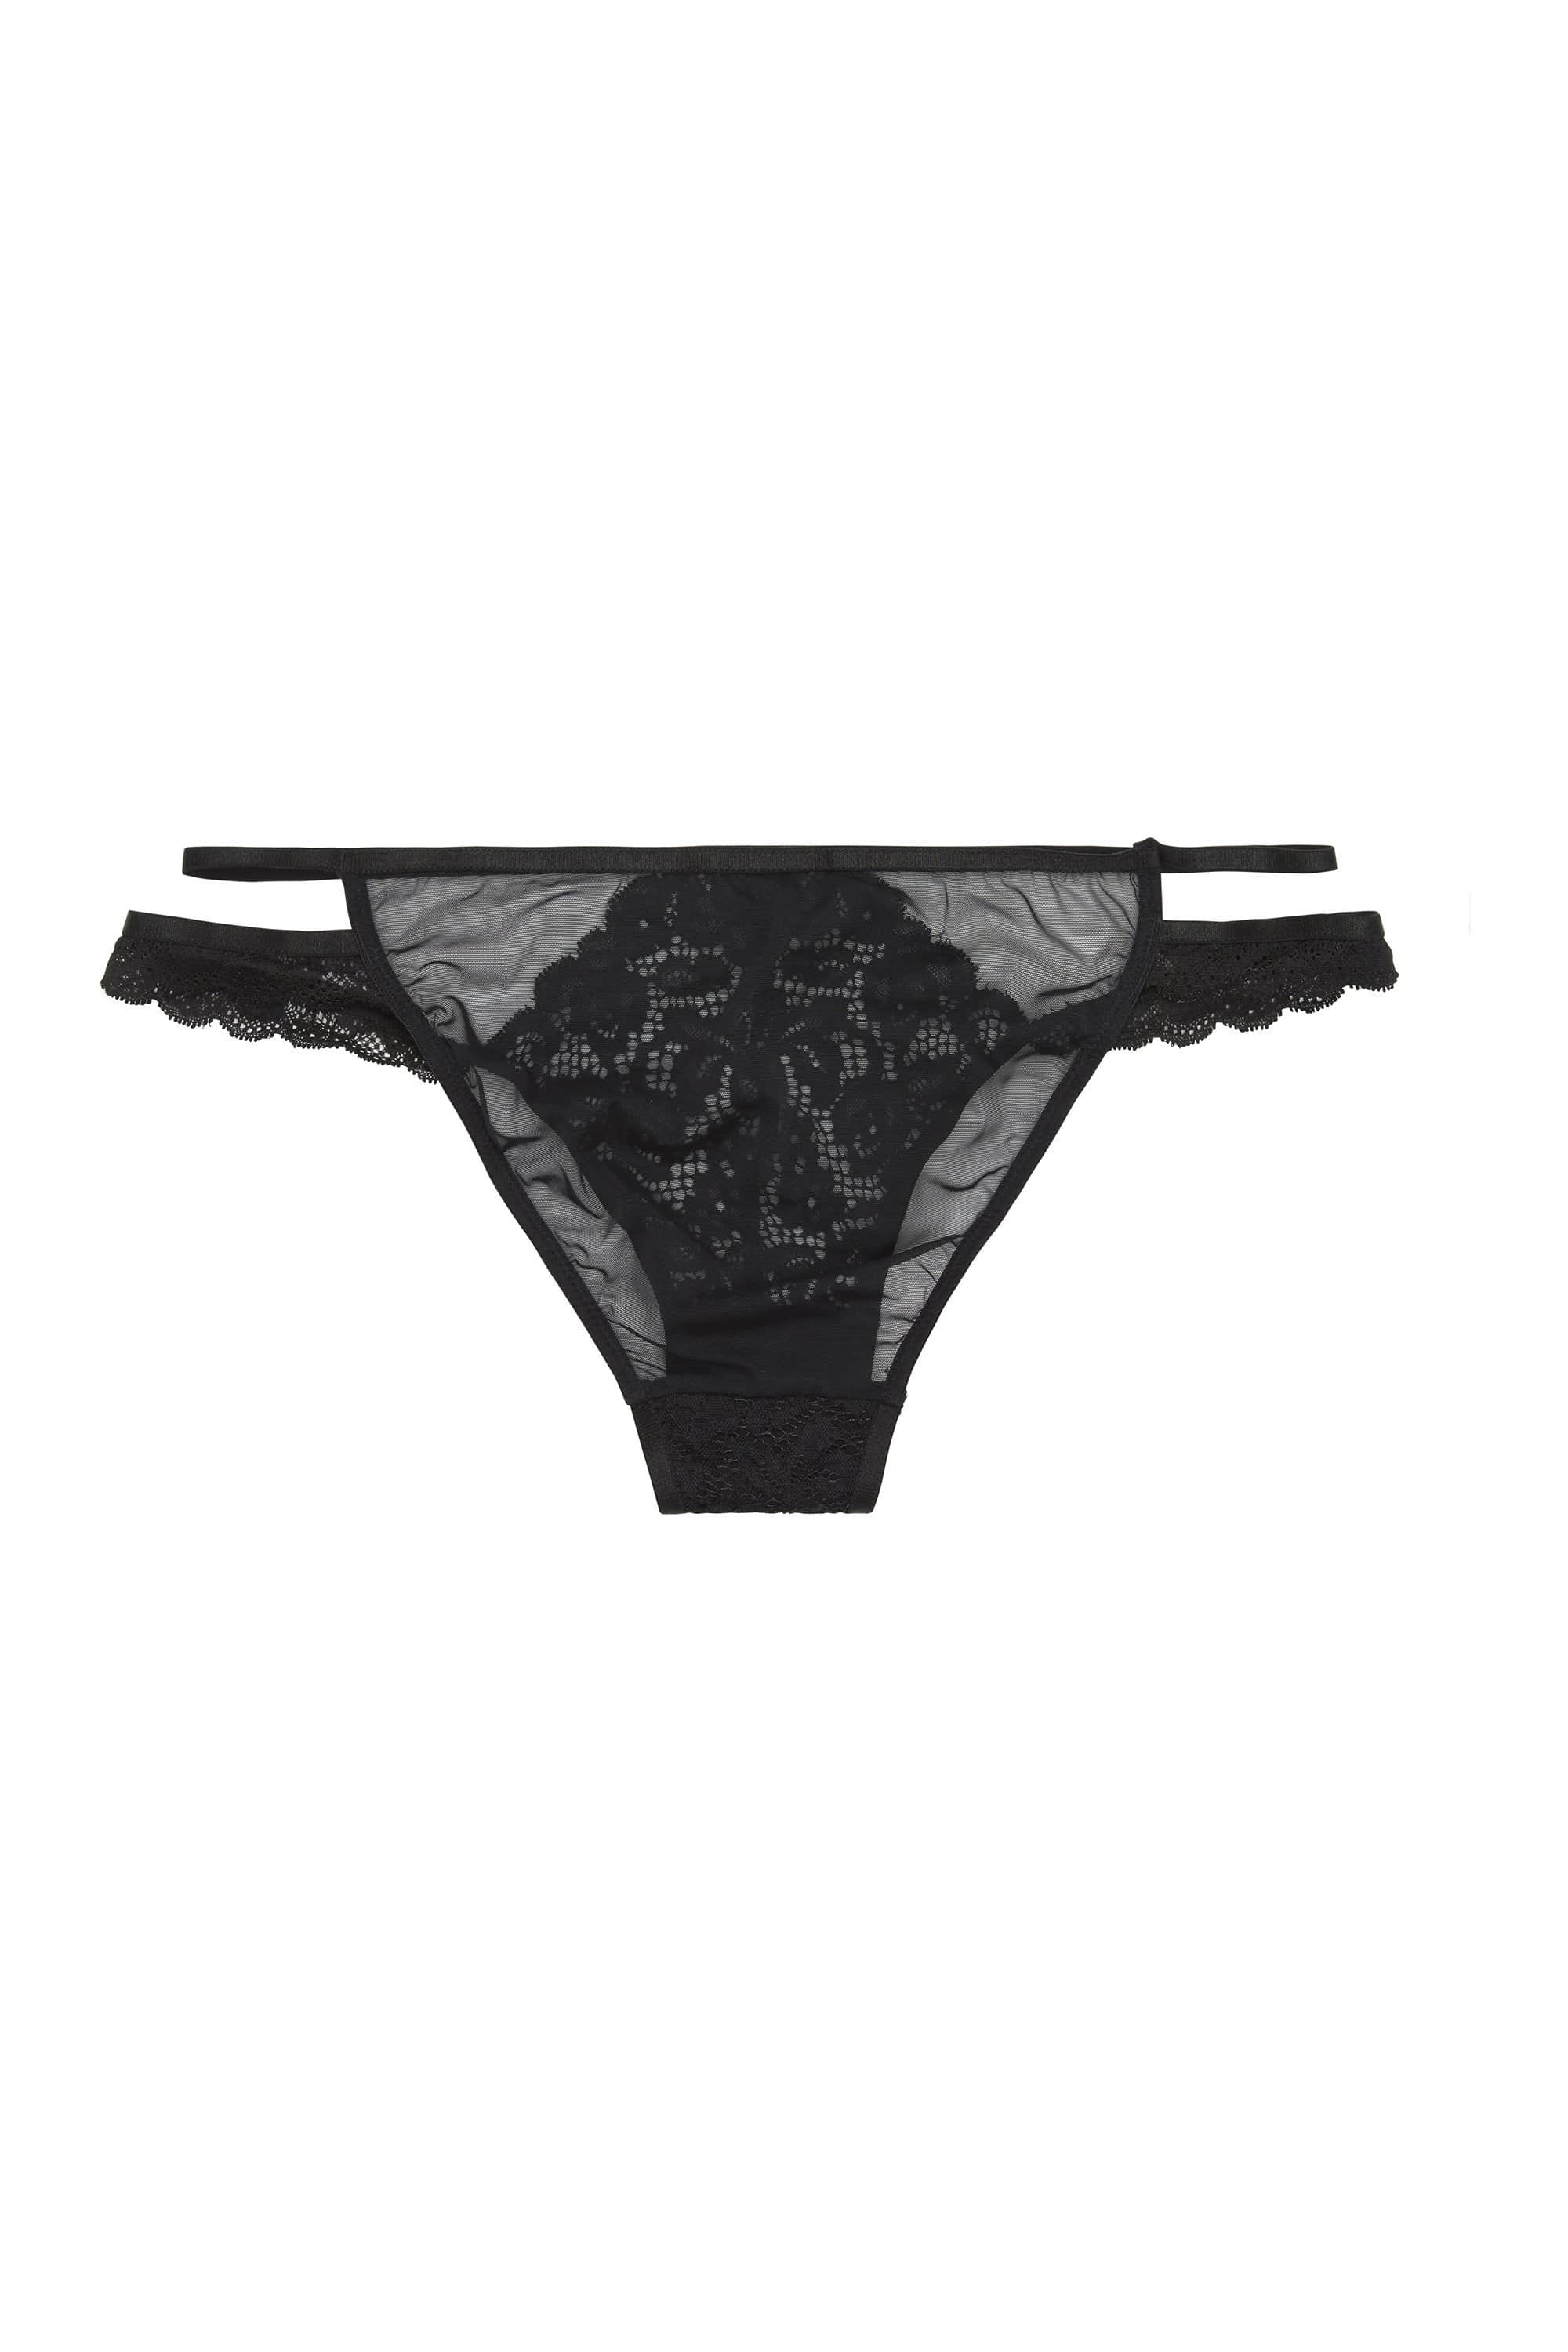 Wolf & Whistle Abi Black lace cut out brief